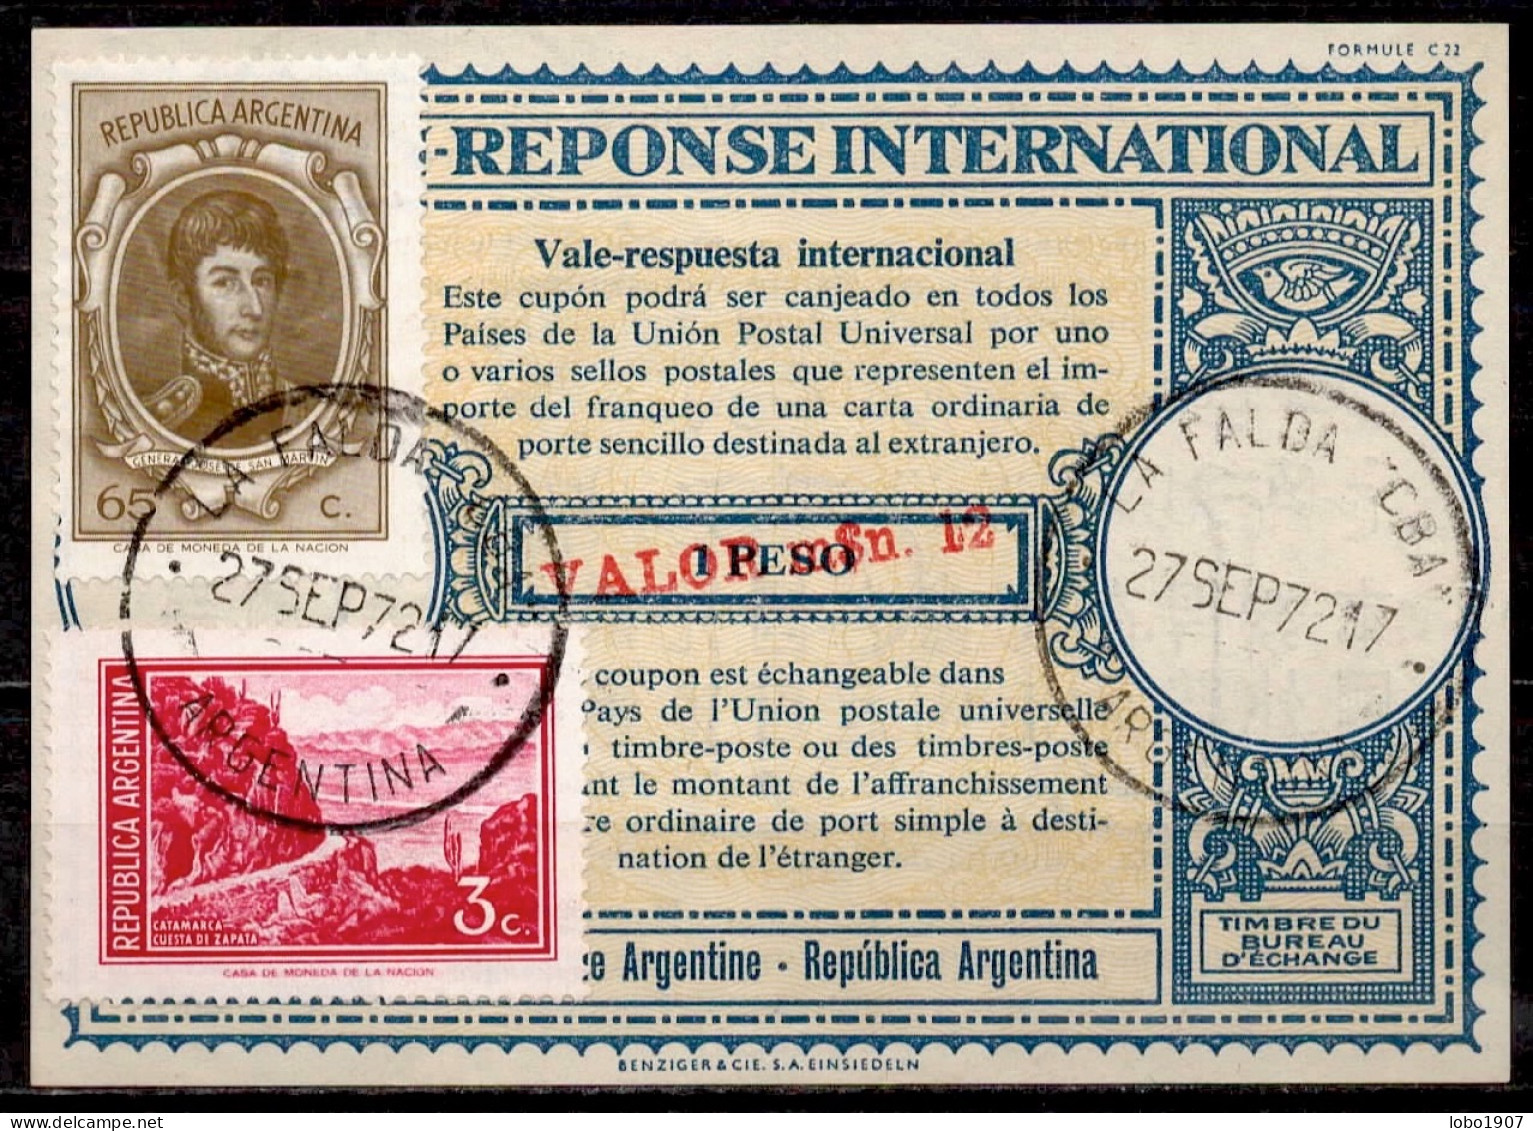 ARGENTINE ARGENTINA Lo16u  M$.12 / 1 PESO + Stamps 88 Pesos International Reply Coupon Reponse Antwortschein IRC IAS - Entiers Postaux